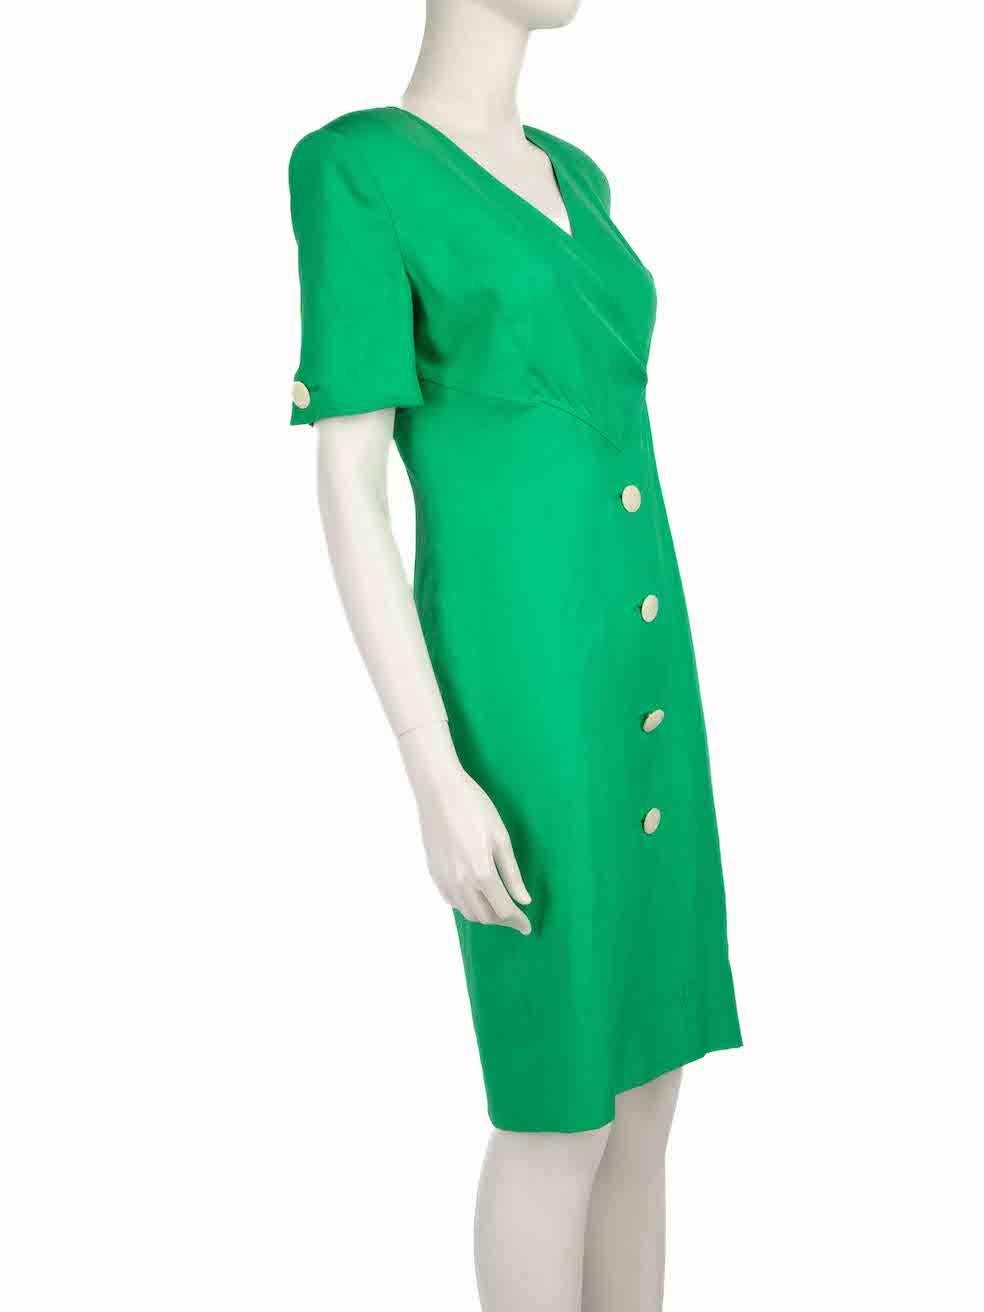 CONDITION is Very good. Minimal wear to dress is evident. Minimal wear to the right underarm seam at the lining with a small hole. The composition label is missing on this used Valentino Boutique designer resale item.
 
 
 
 Details
 
 
 Green
 
